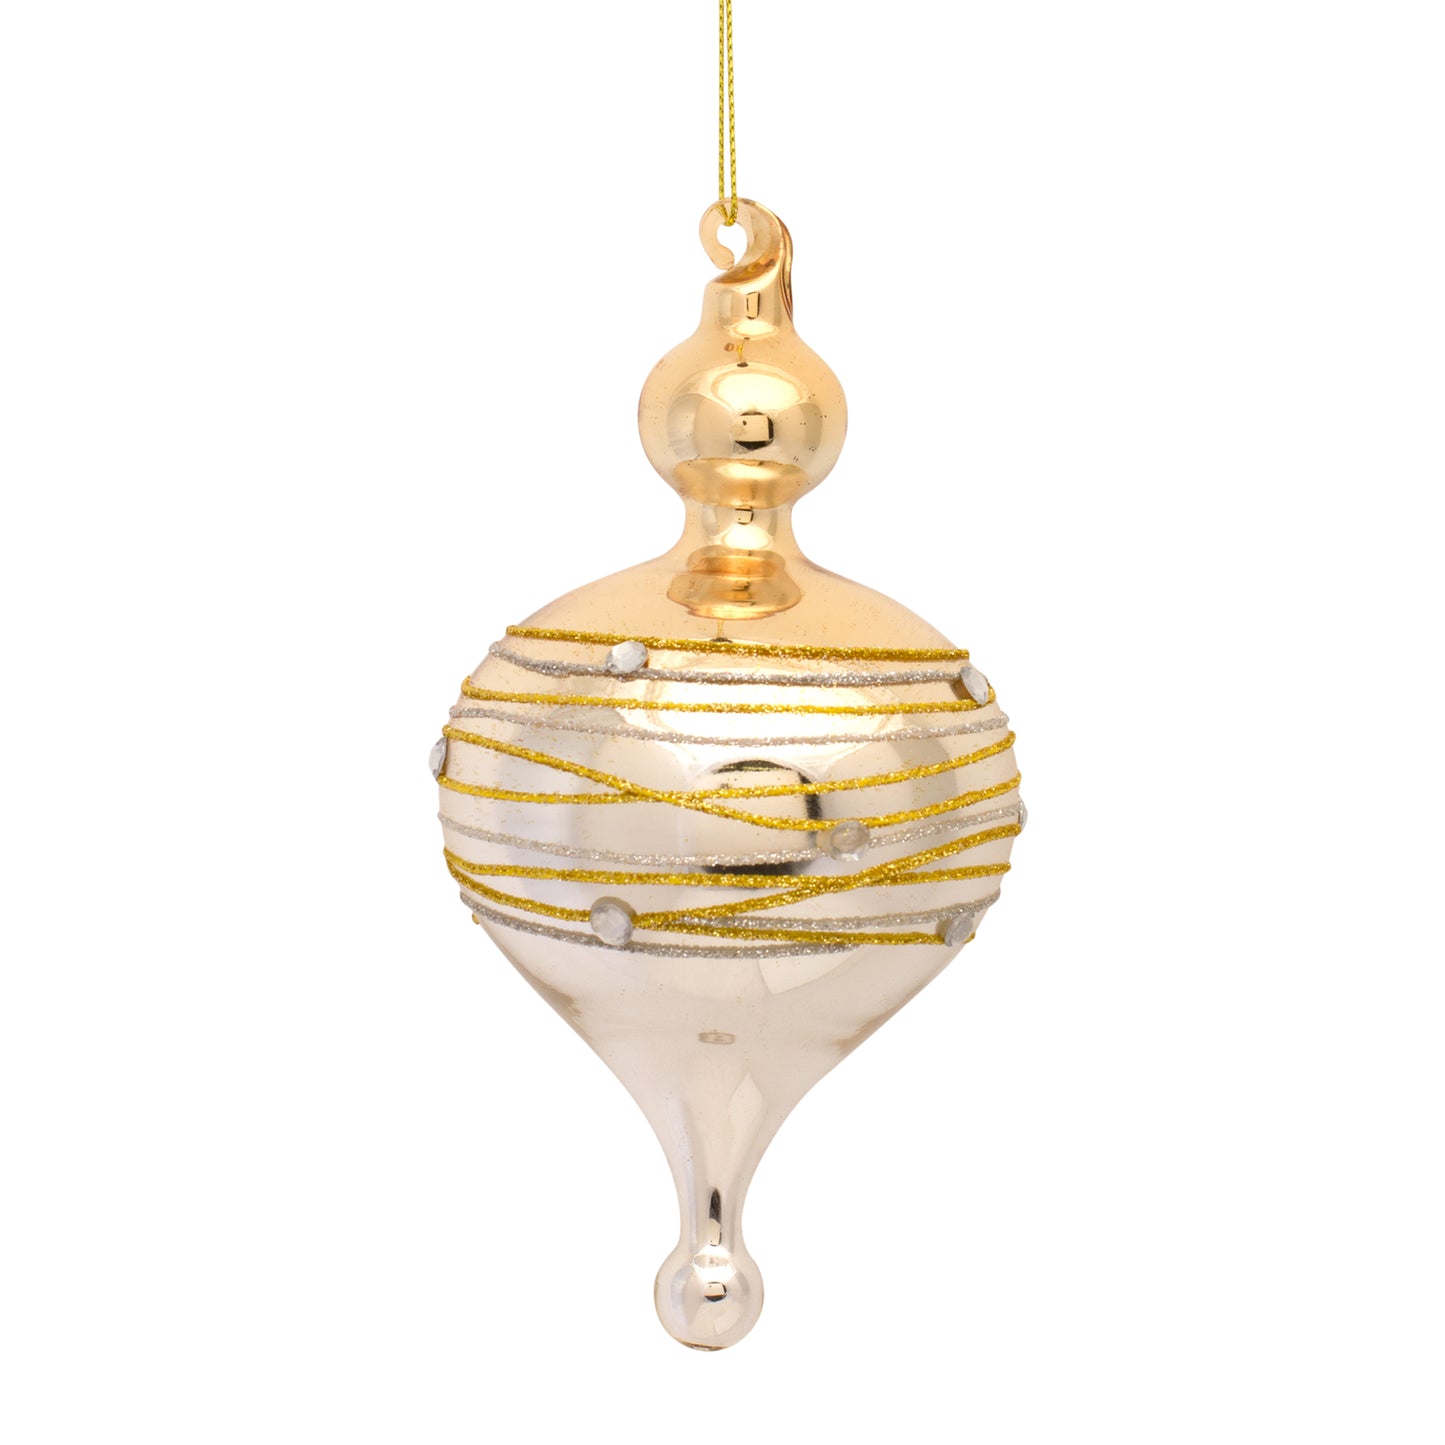 Gilded Gold Antique 6.5"H or 7.25"H Glass Ornament